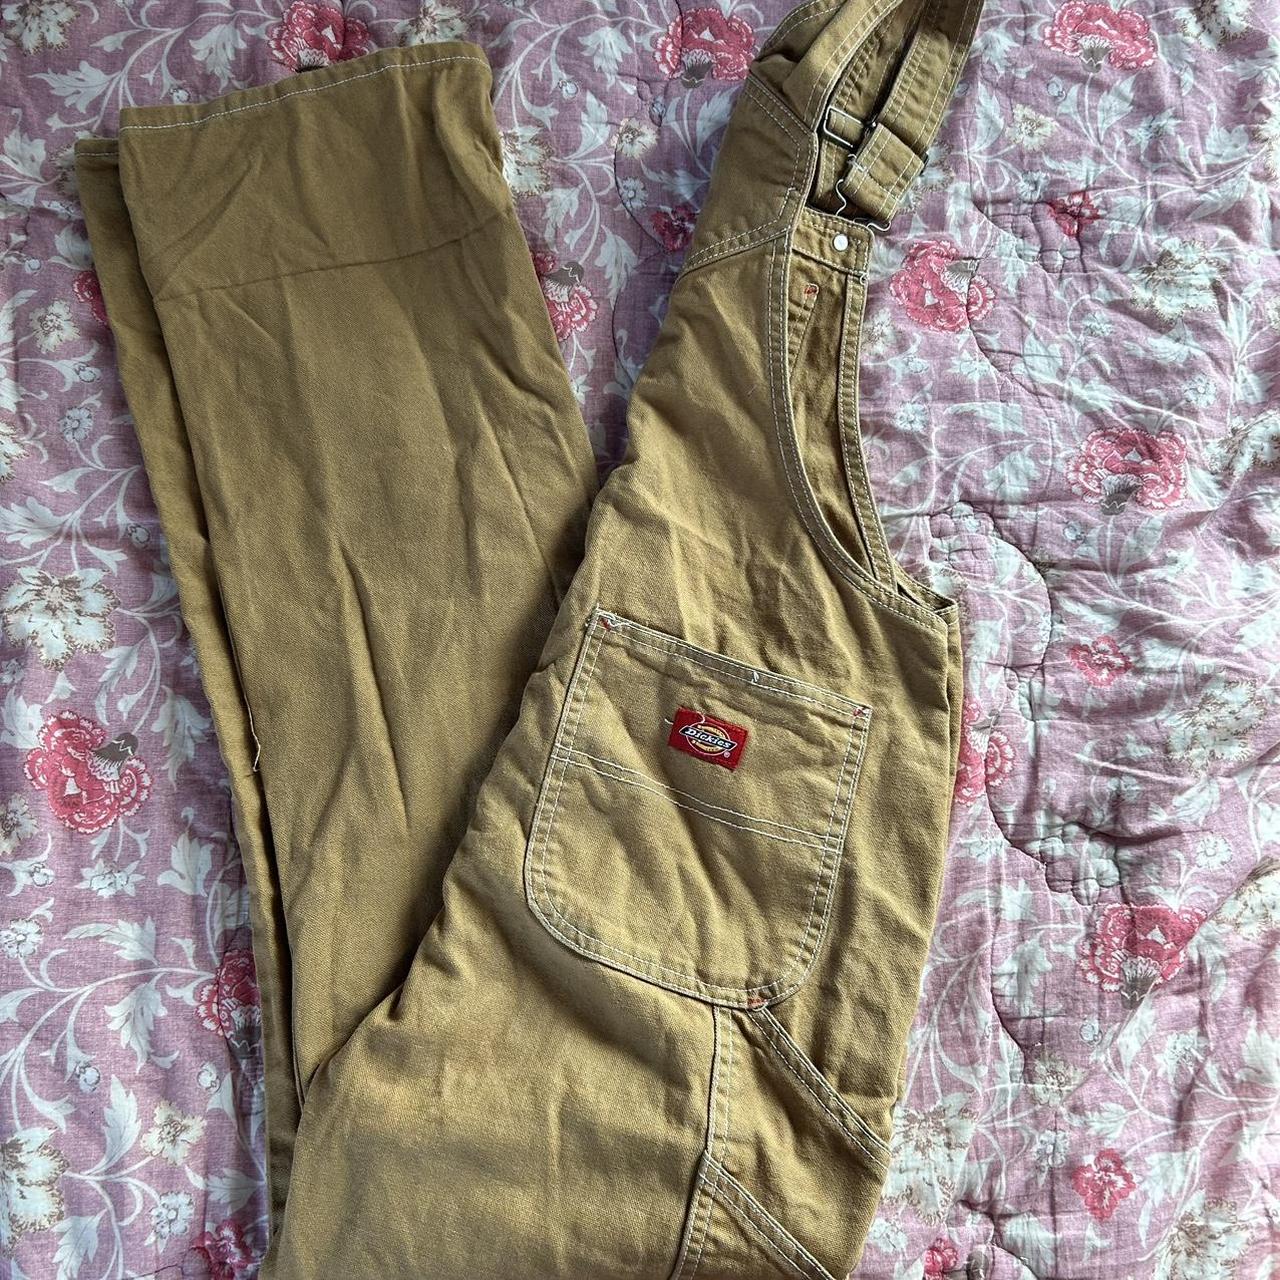 Dickies Women's Tan and Brown Dungarees-overalls (4)